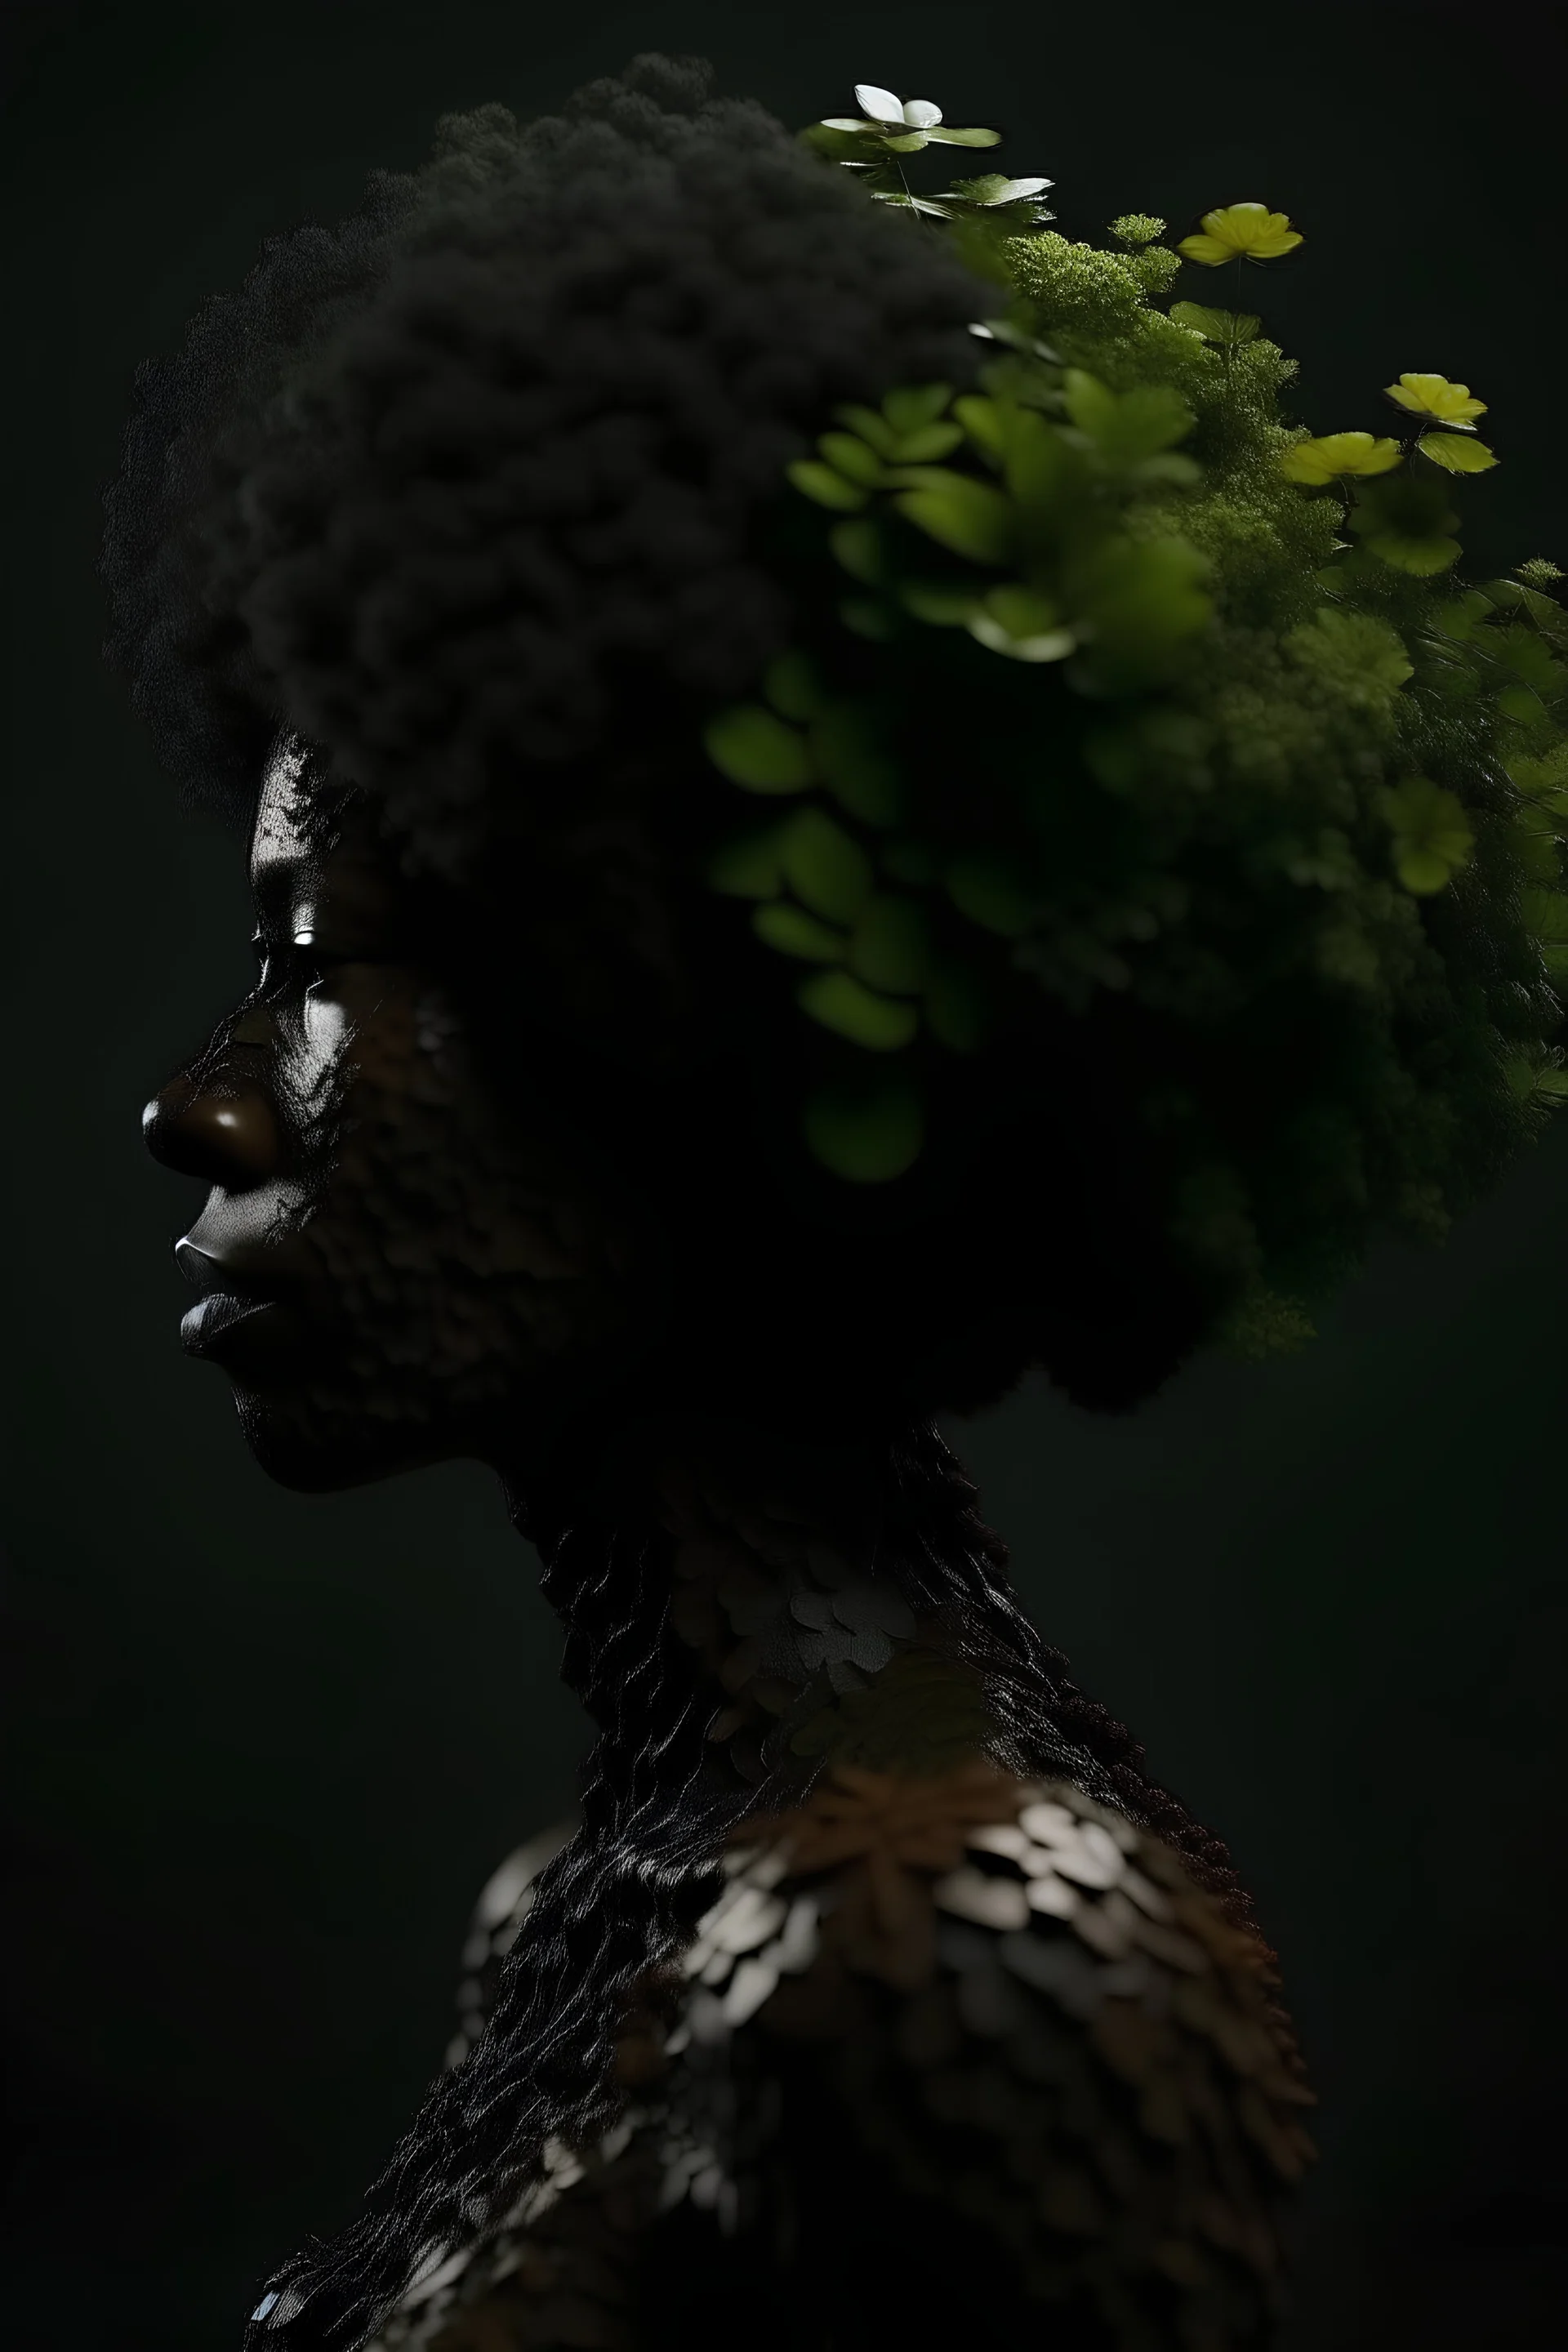 afro made out of plants low fidelity no face 4k